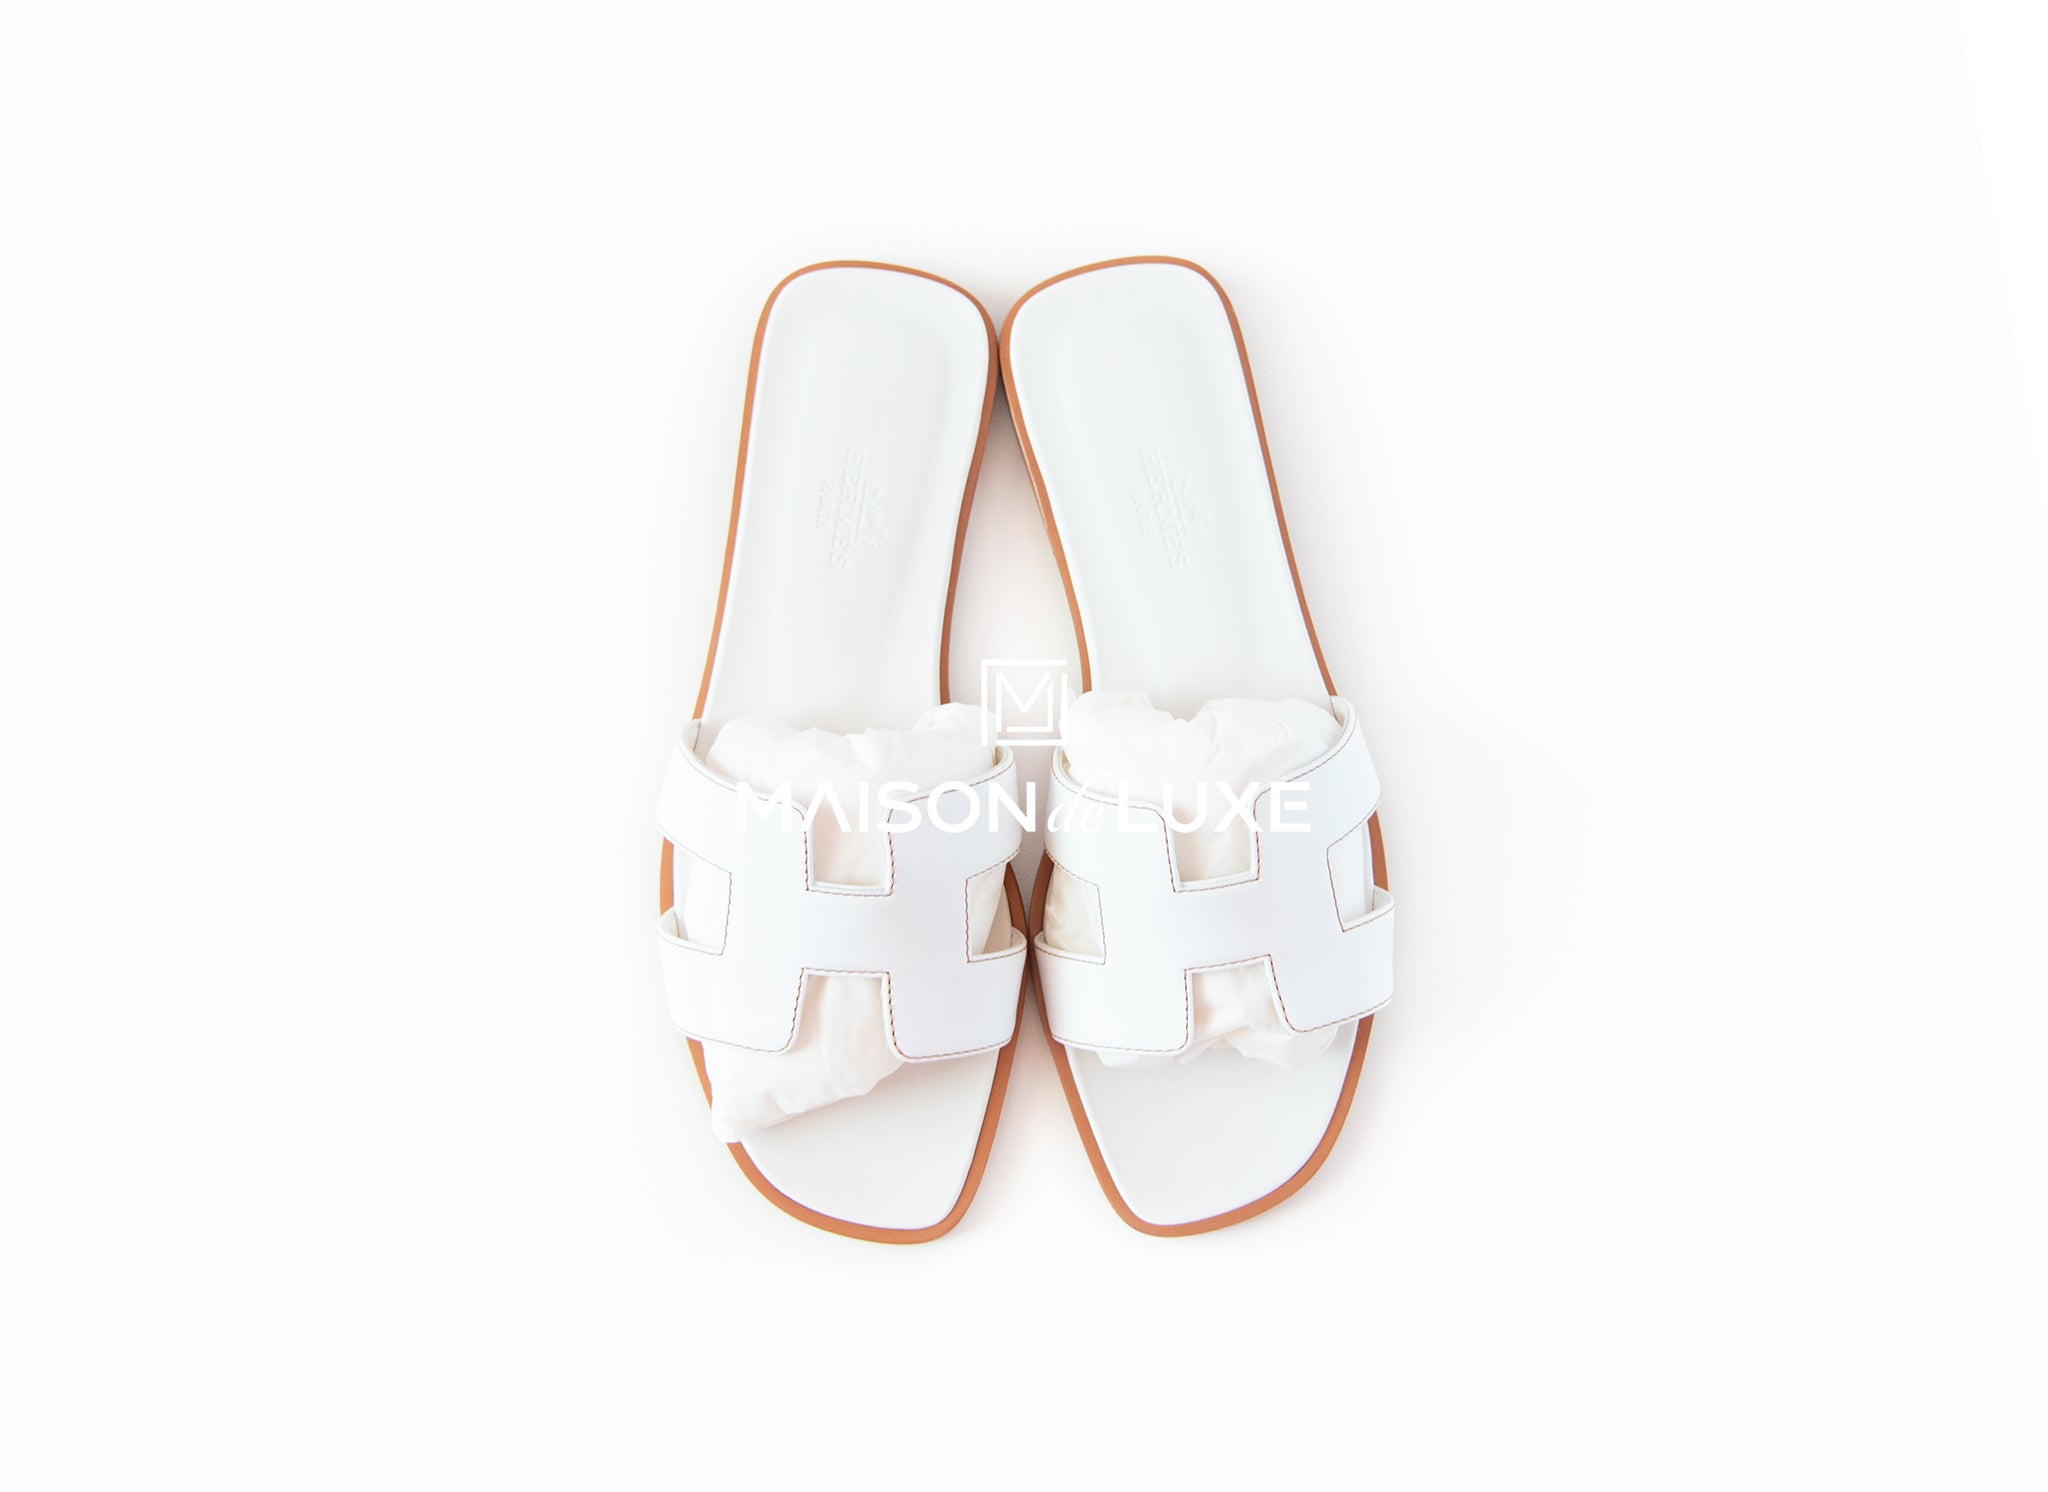 The Chic Summer Sandals Fashion Minimalists Have Been Buying for Years |  Hermes shoes, Leather sandals, Womens sandals